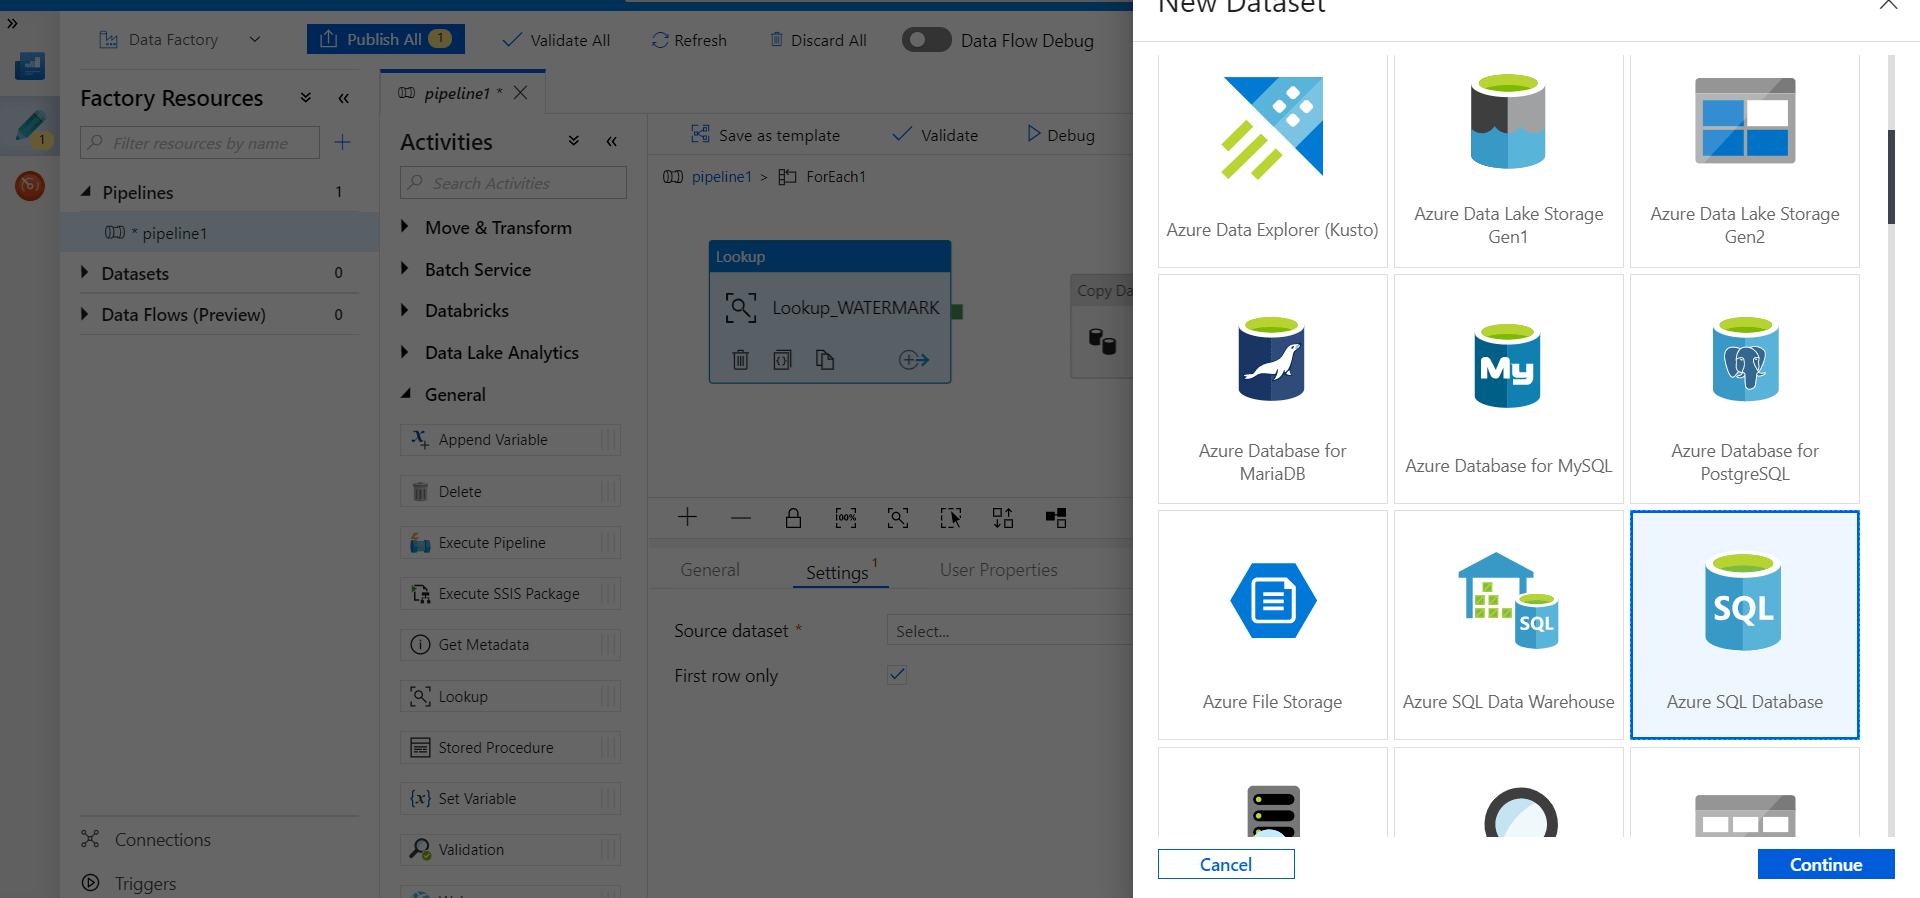 INCREMENTALLY LOAD FROM MULTIPLE TABLES IN AZURE DATA FACTORY